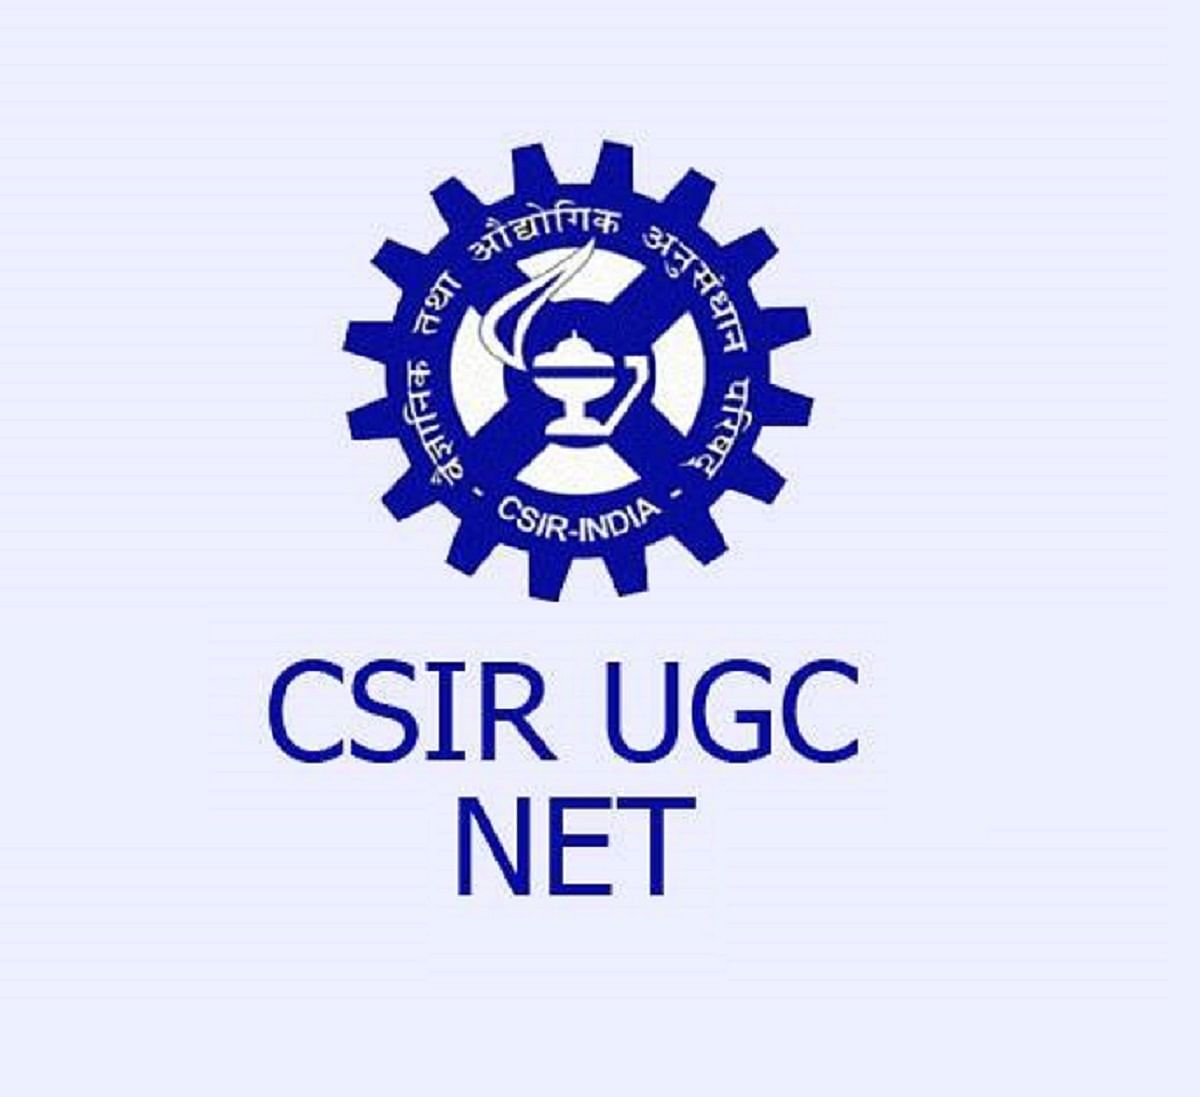 CSIR UGC NET December 2019: Application Process to Conclude Soon, Check Detailed Information Here